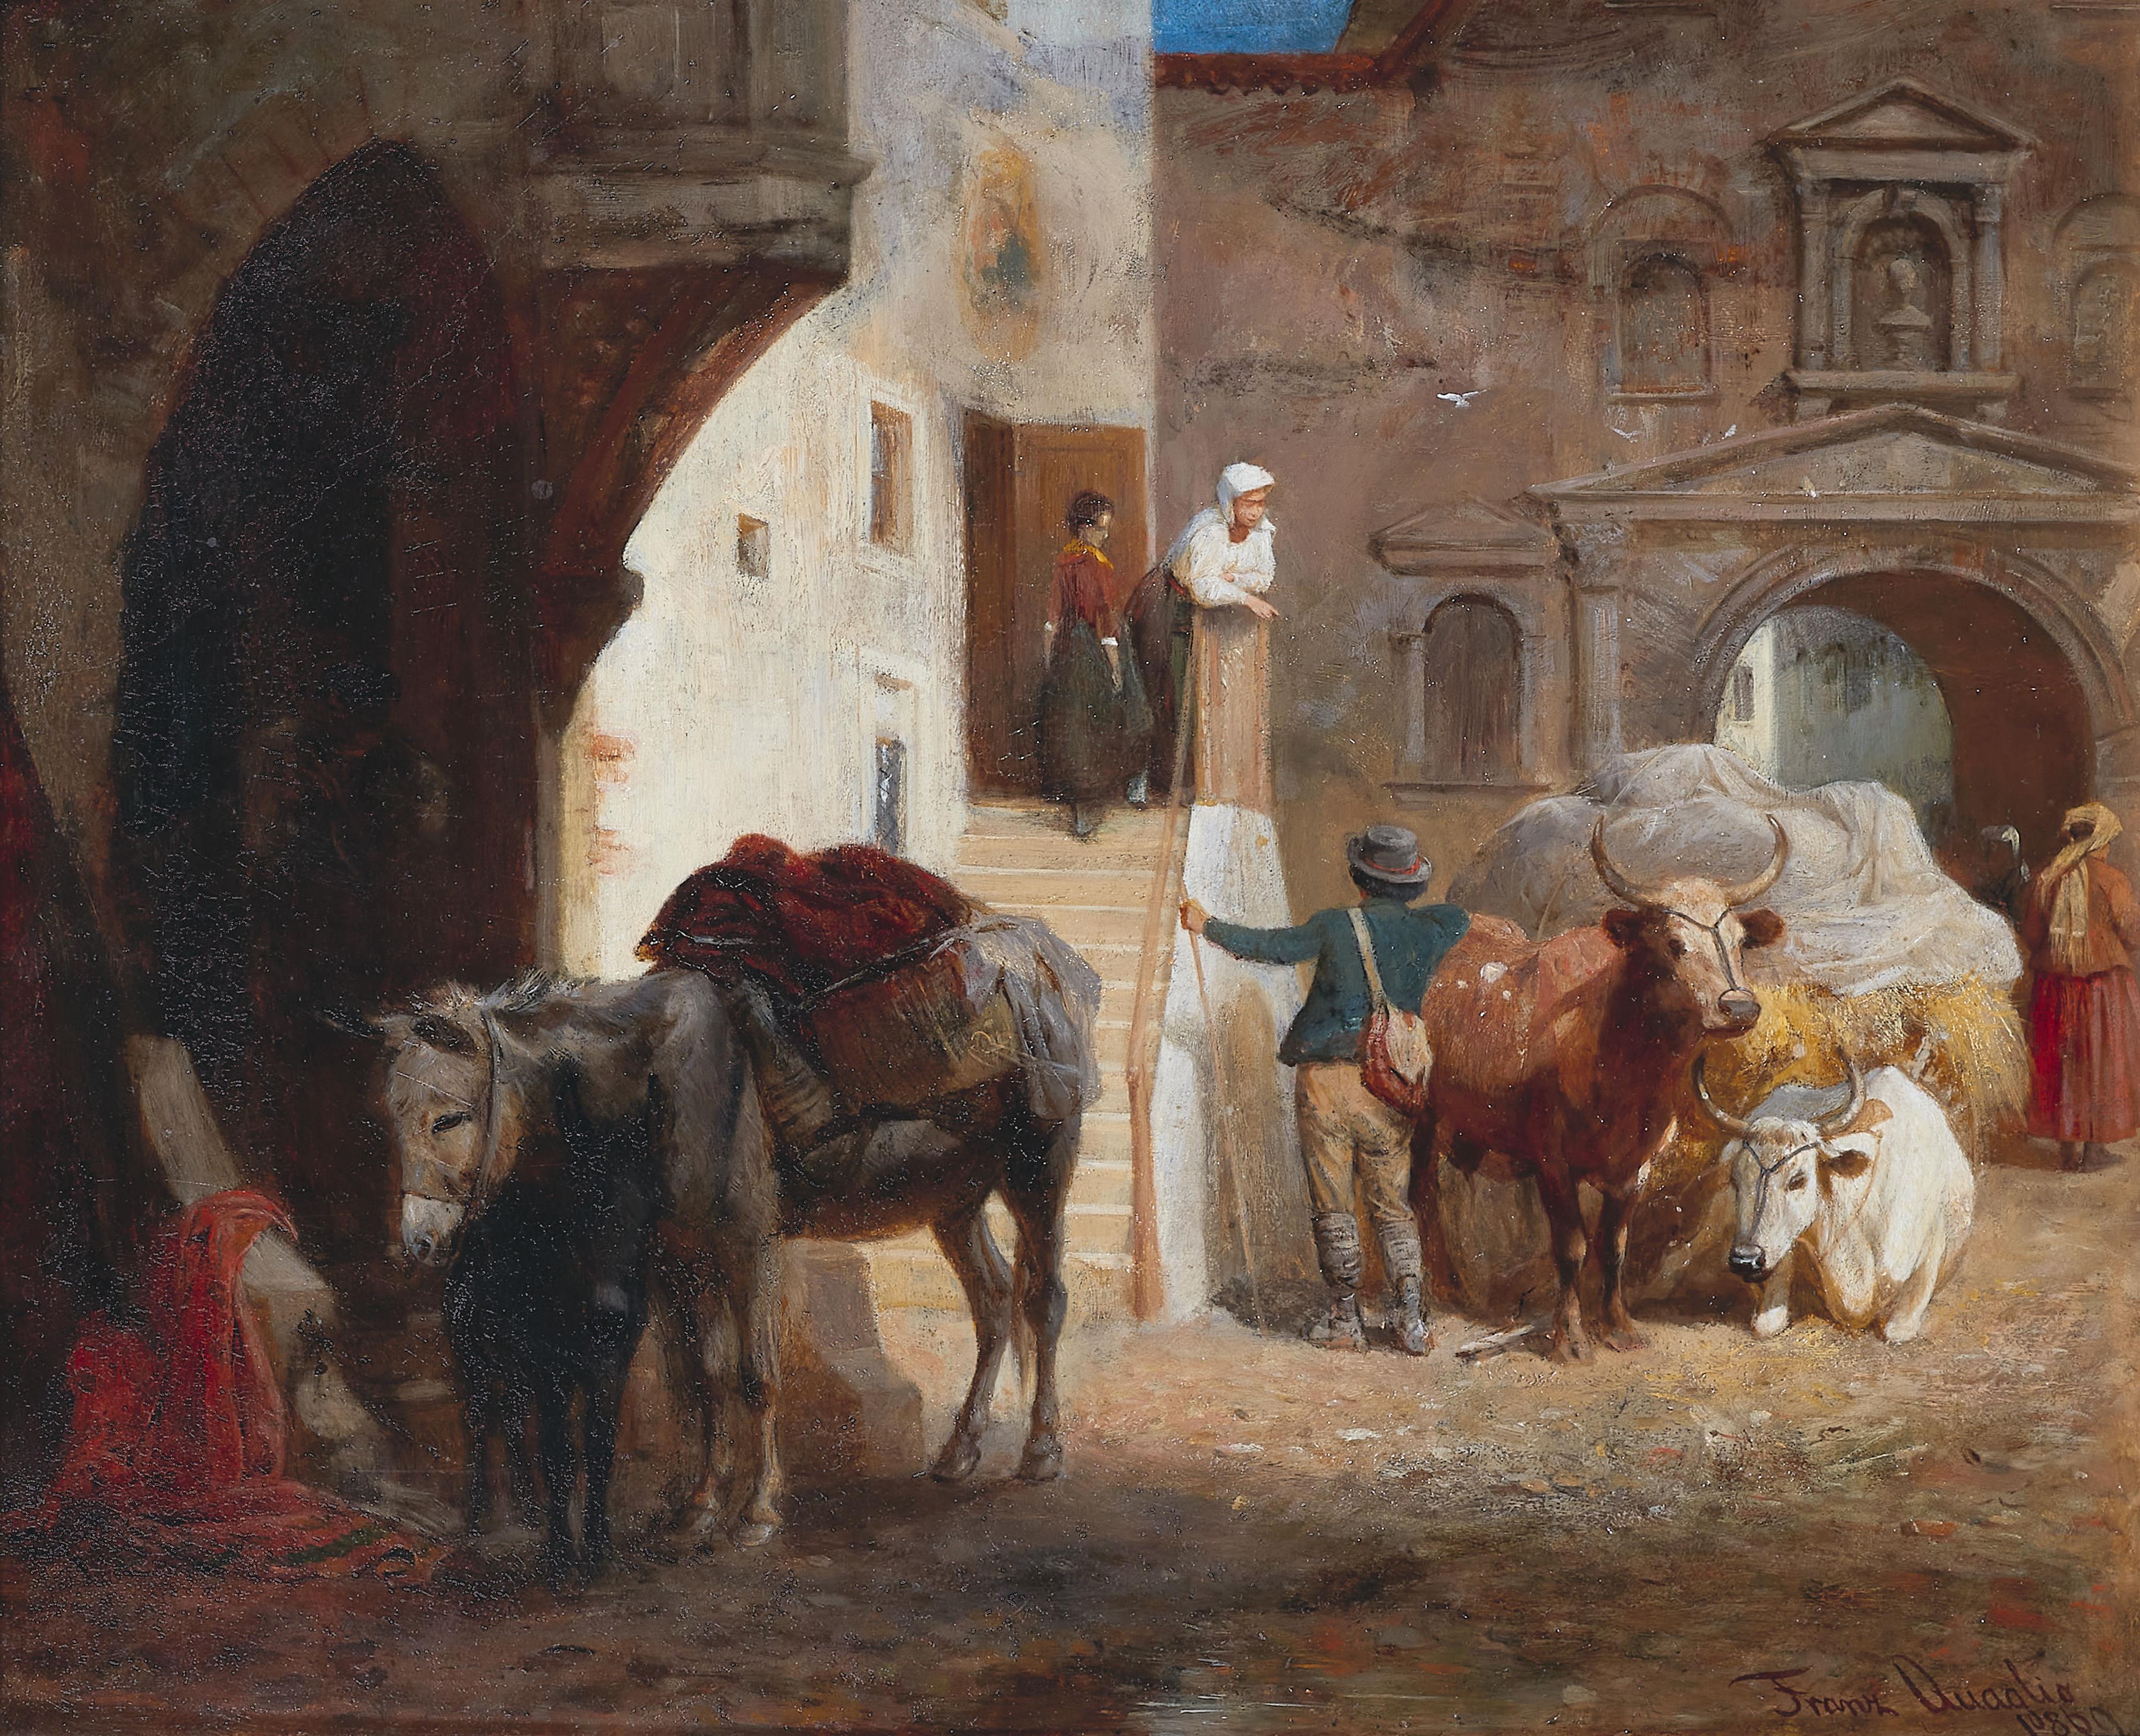 Franz Quaglio - Southern Street Scene with a Mule and an Oxcart - image-1